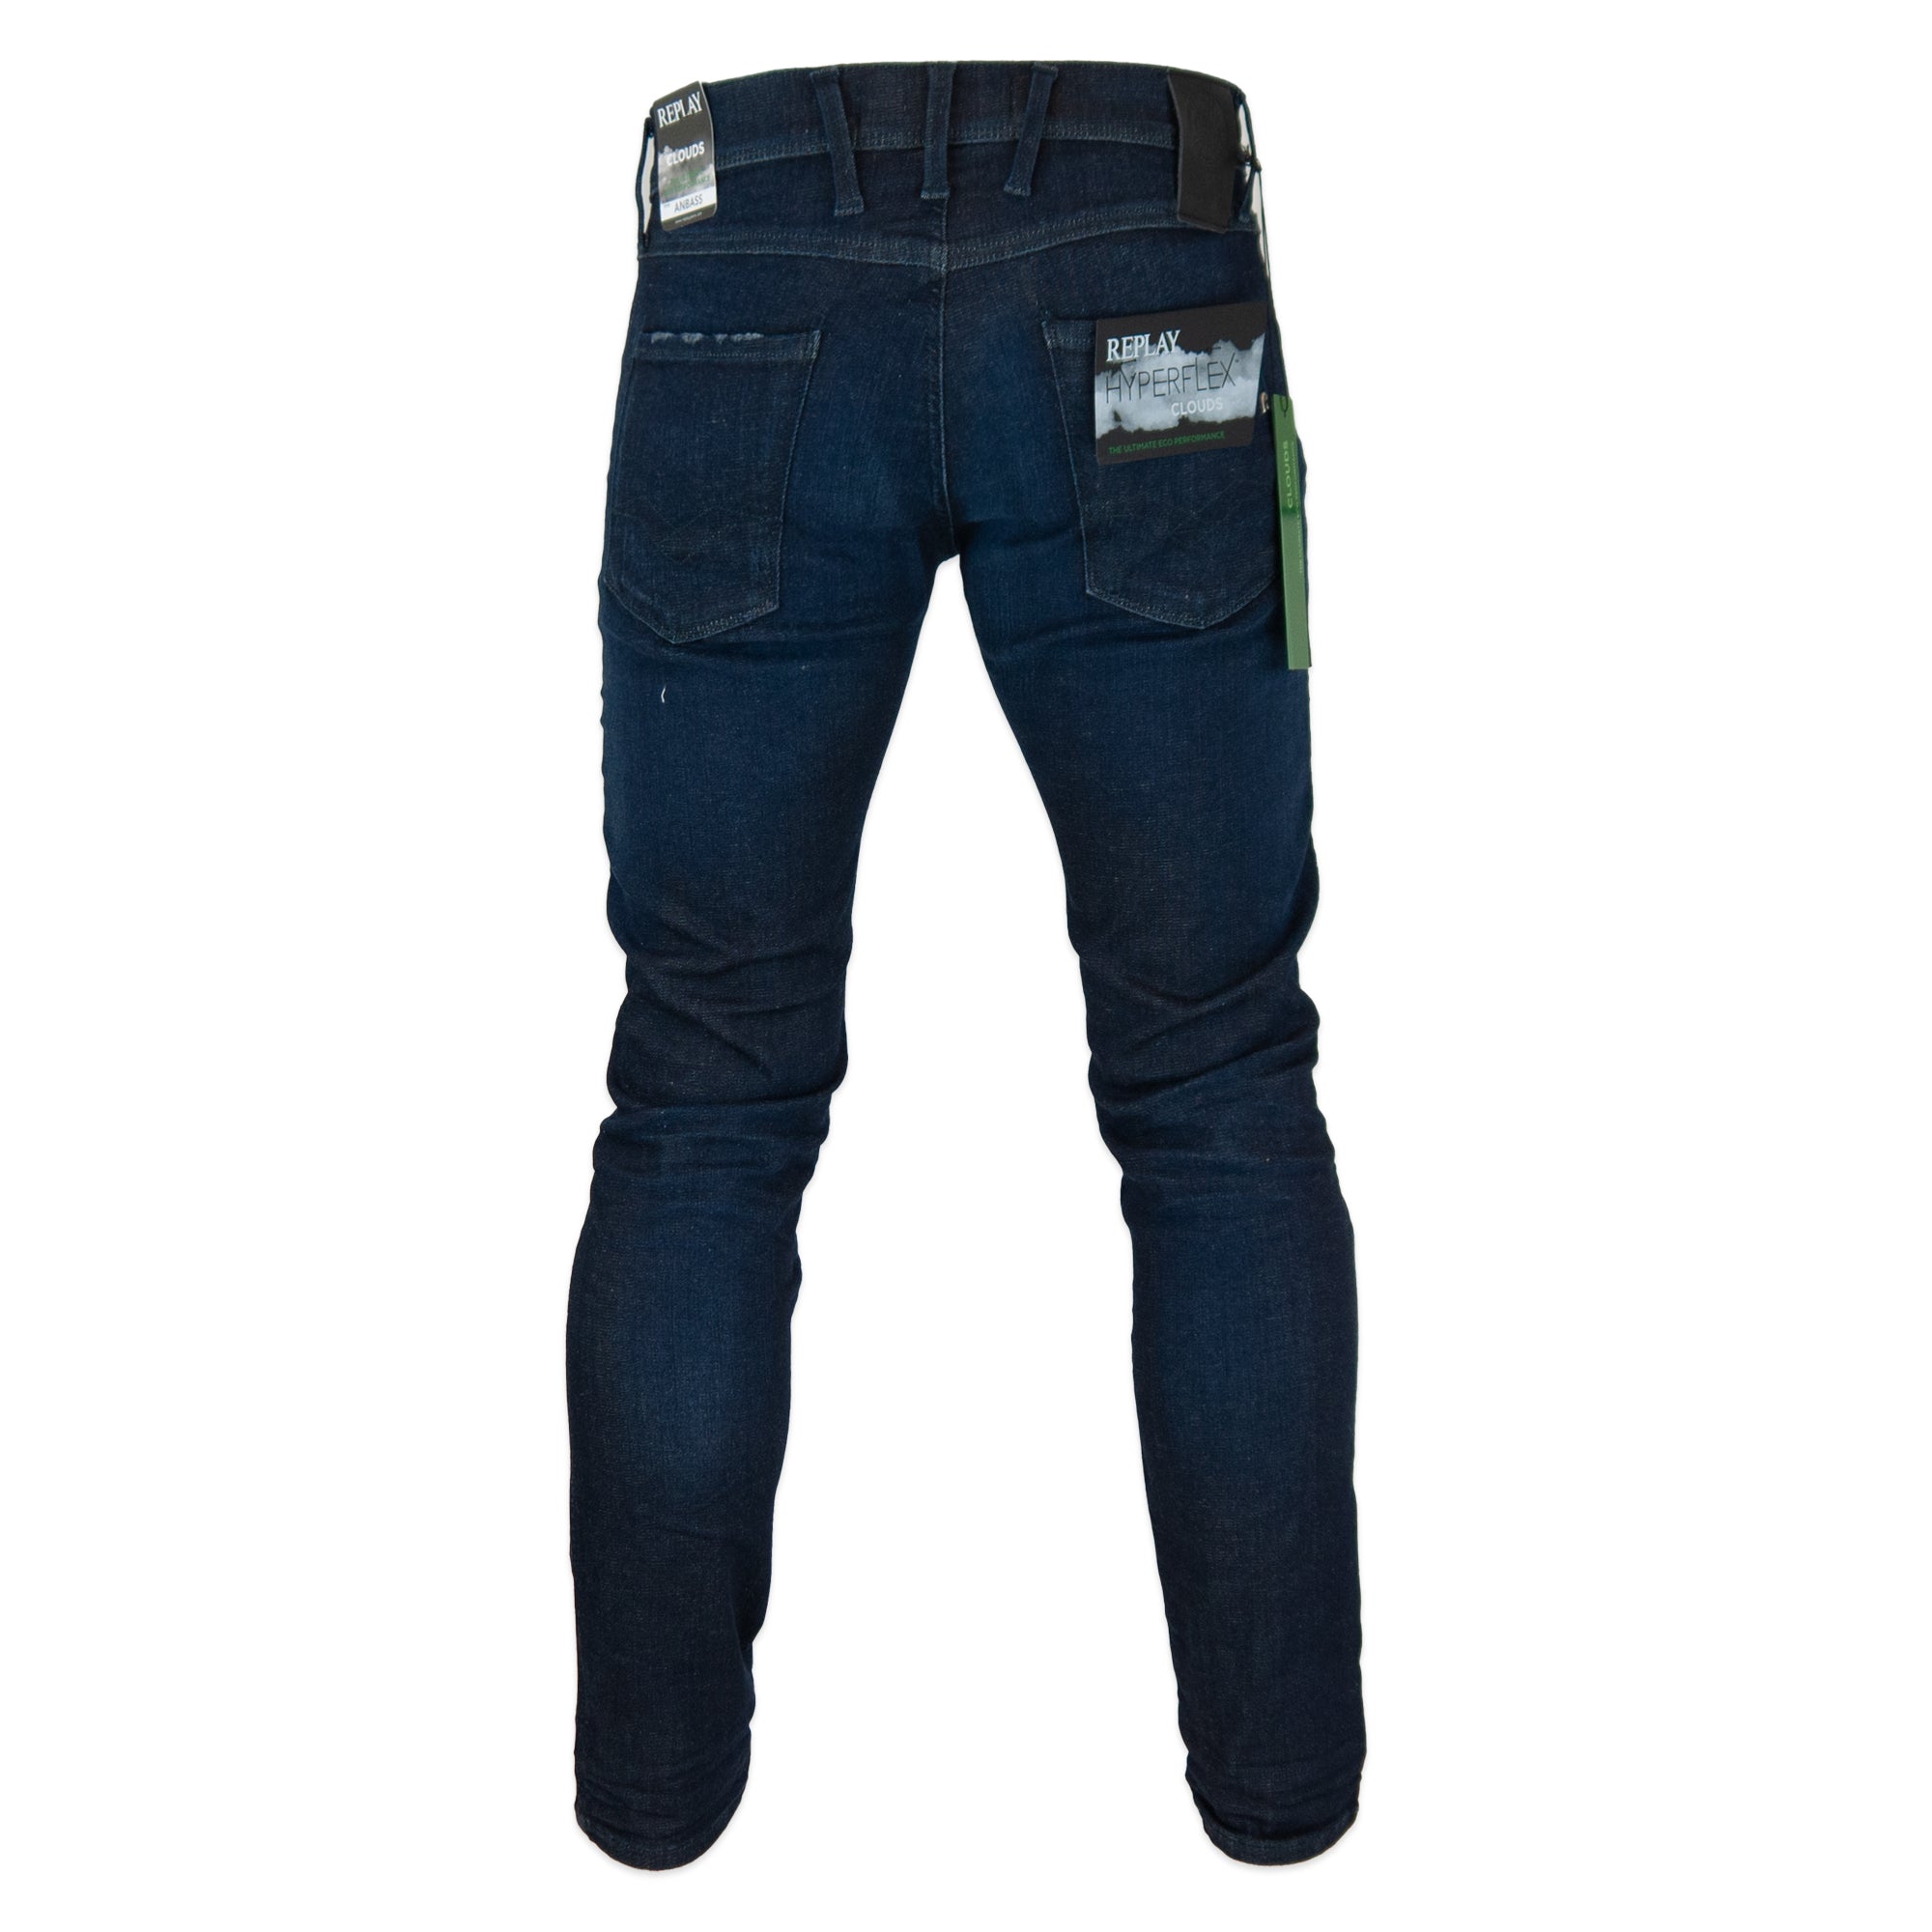 Replay Hyperflex Anbass CLOUDS Edition Slim Fit Jeans - Rinse Dark Blue